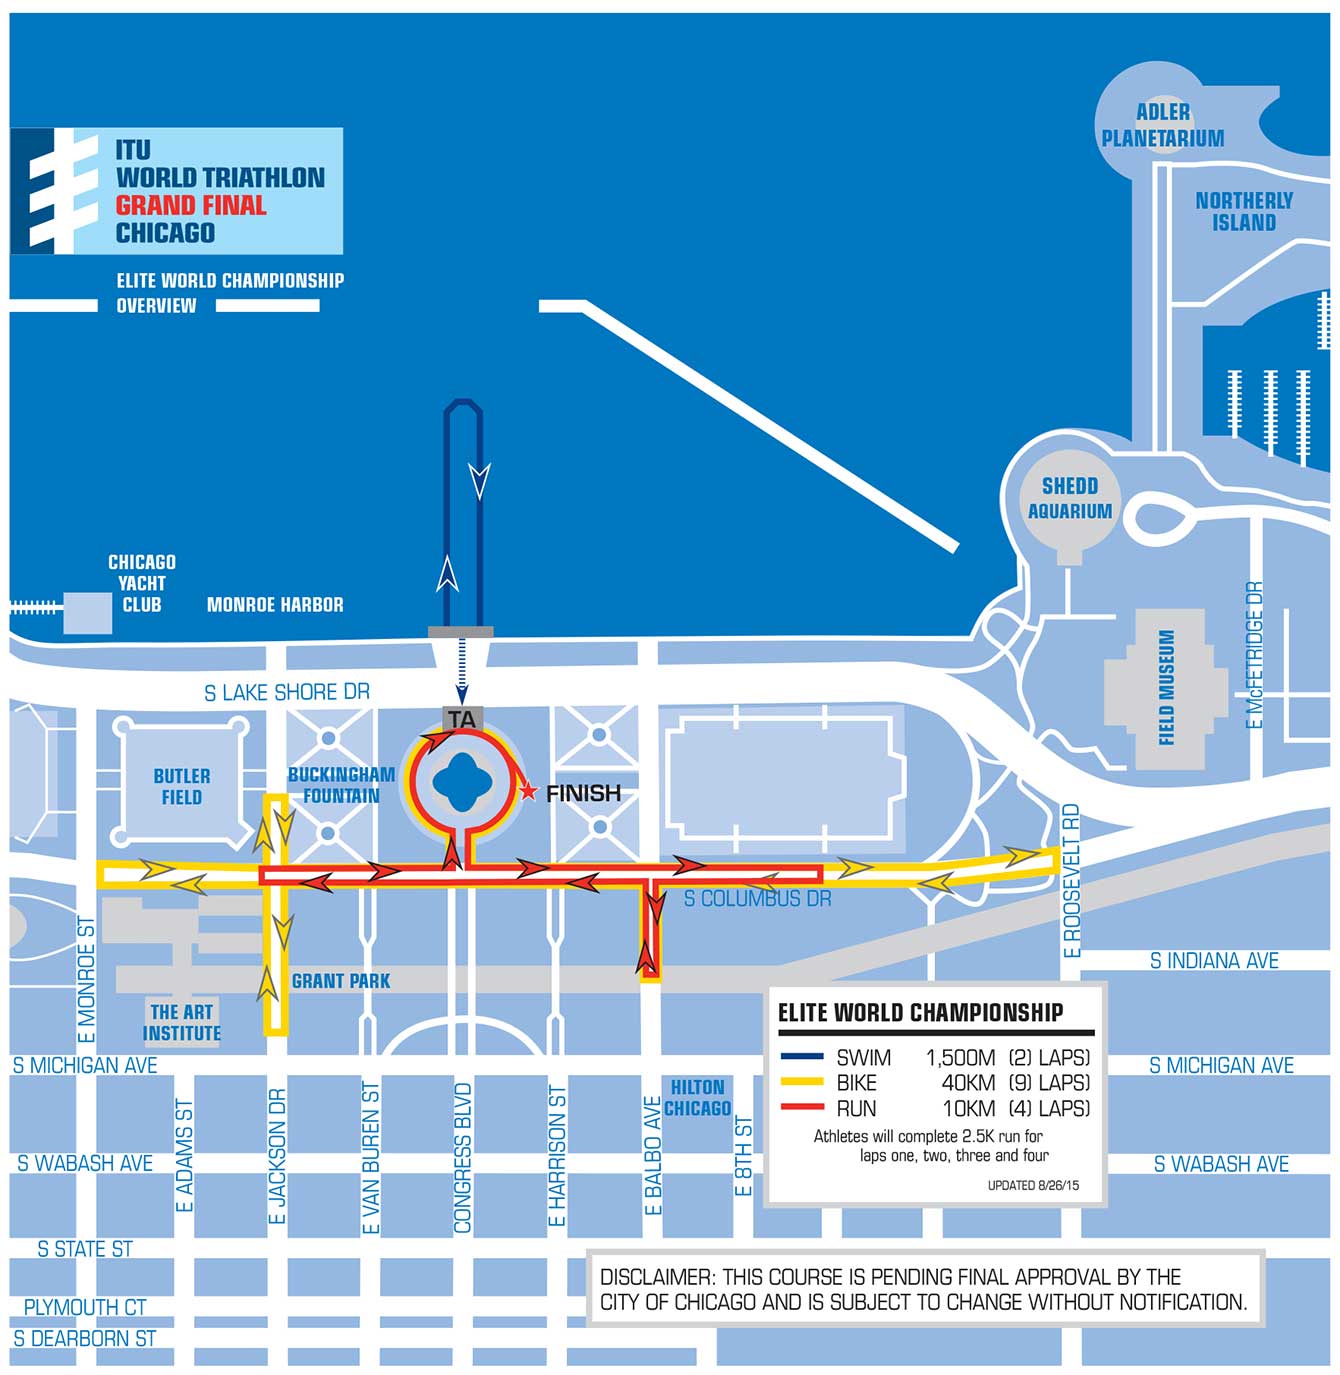 The Chicago course is almost entirely in Grant Park, except for the swim of course. (Map: ITU)